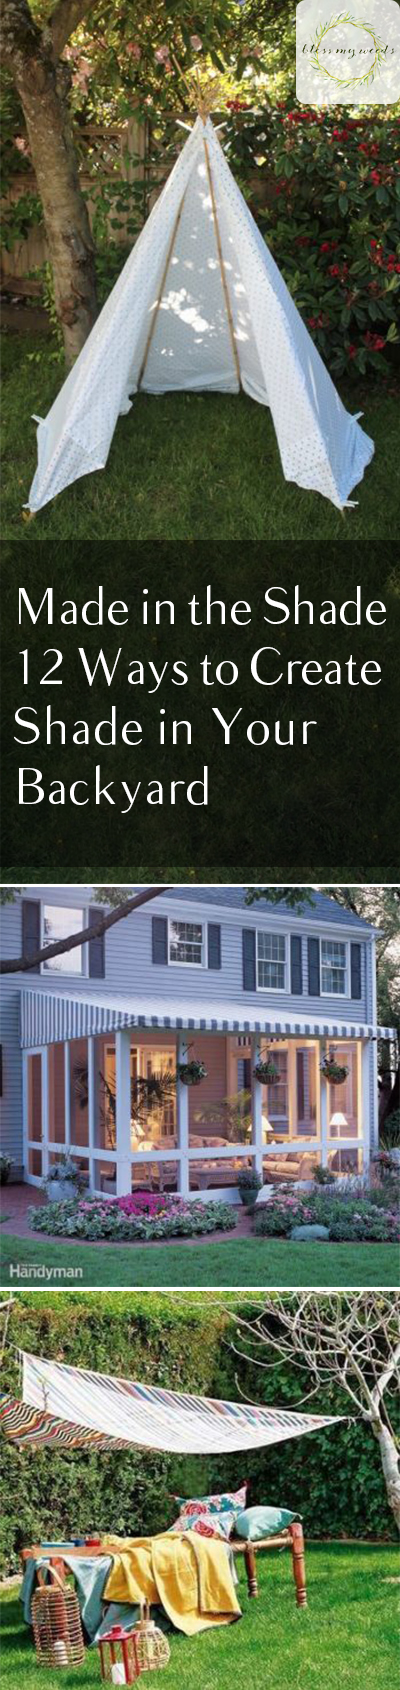 Shade, Backyard Shade Ideas, How to Shade Your Yard, Easy Ways to Add Backyard Shade, Yard Shade Ideas, Easy Outdoor Shade Ideas, Yard and Landscape Ideas, DIY Outdoor Projects, Popular Gardening Pin